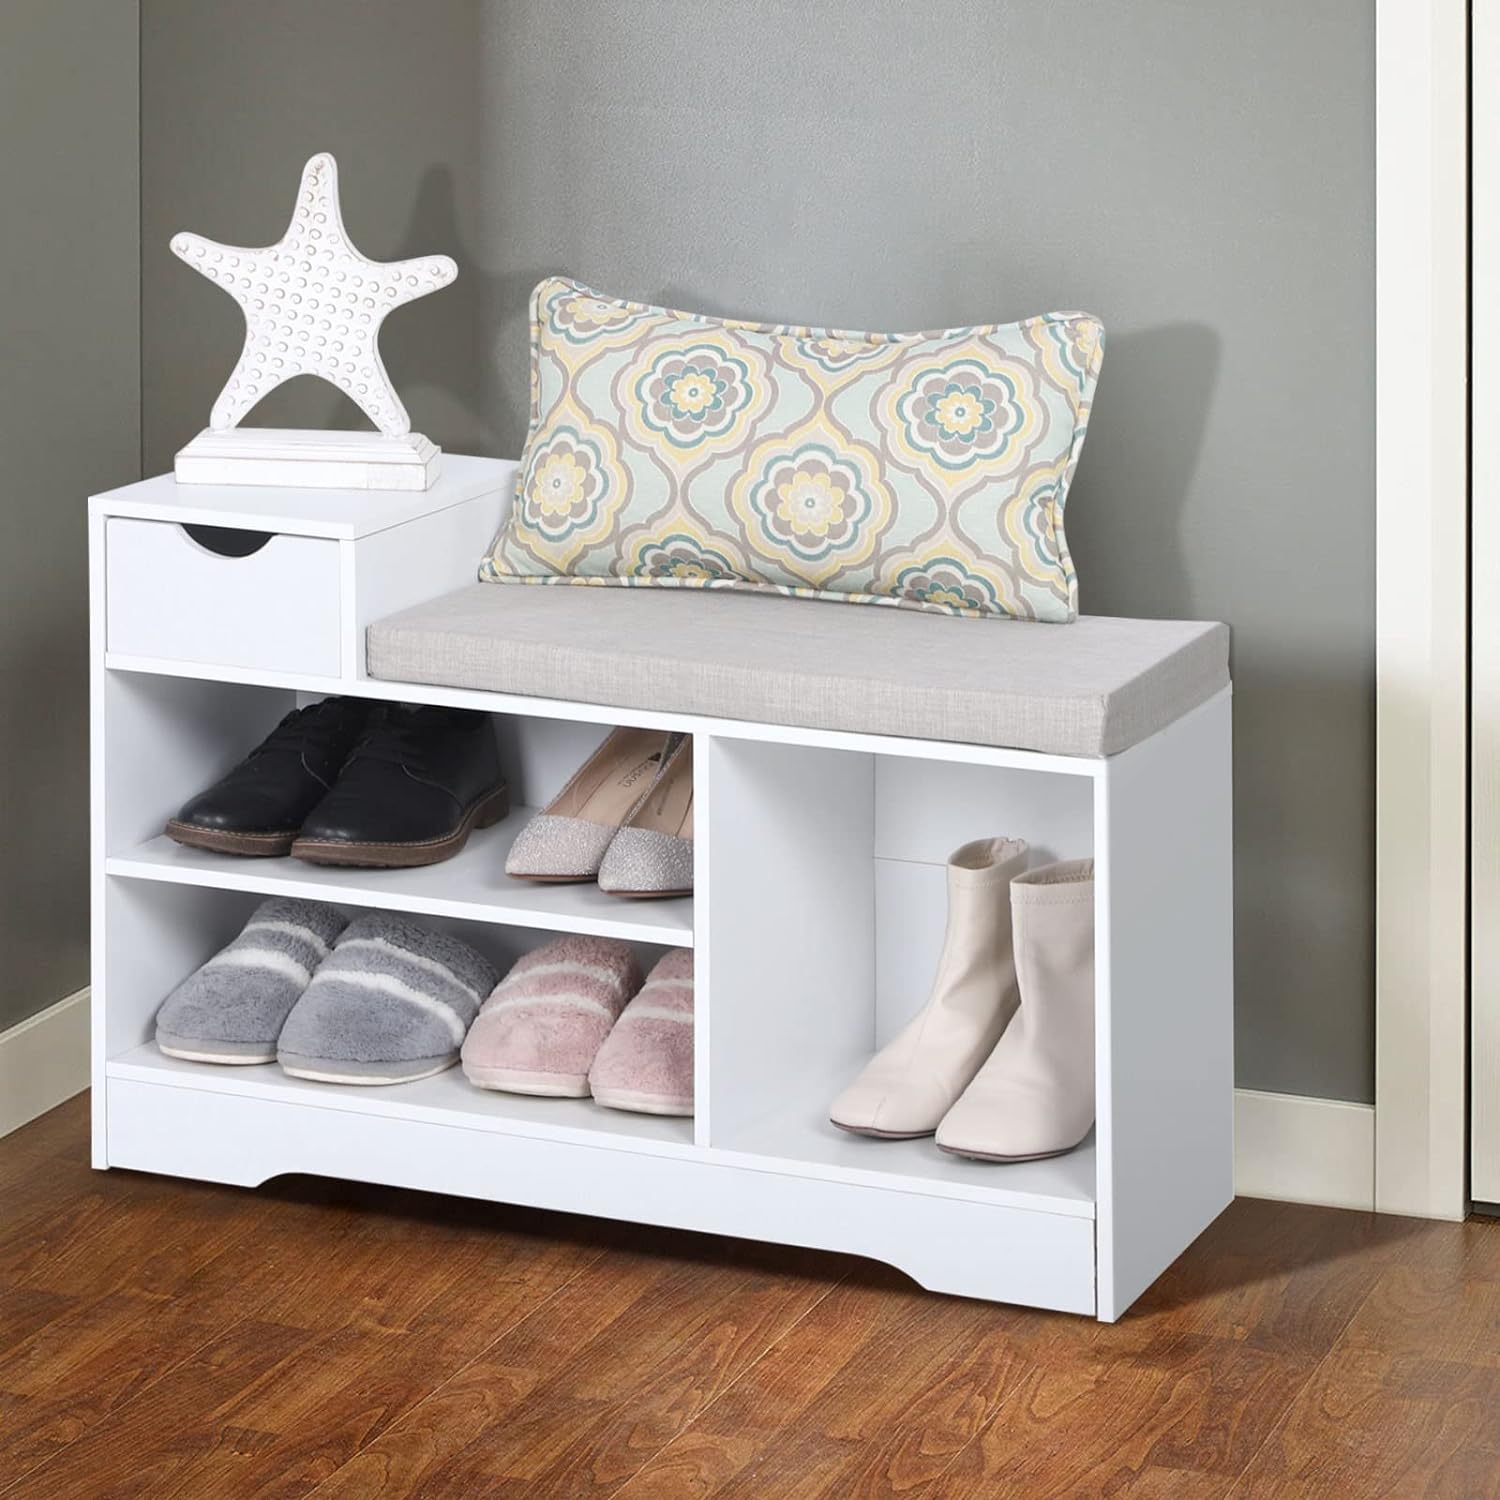 MFSTUDIO Shoe Storage Bench, Shoe Entryway Bench with Seating Cushion and Adjustable Shelves, Freestanding Shoe Rack Organizer for Entryway Hallway Living Room Bedroom, White